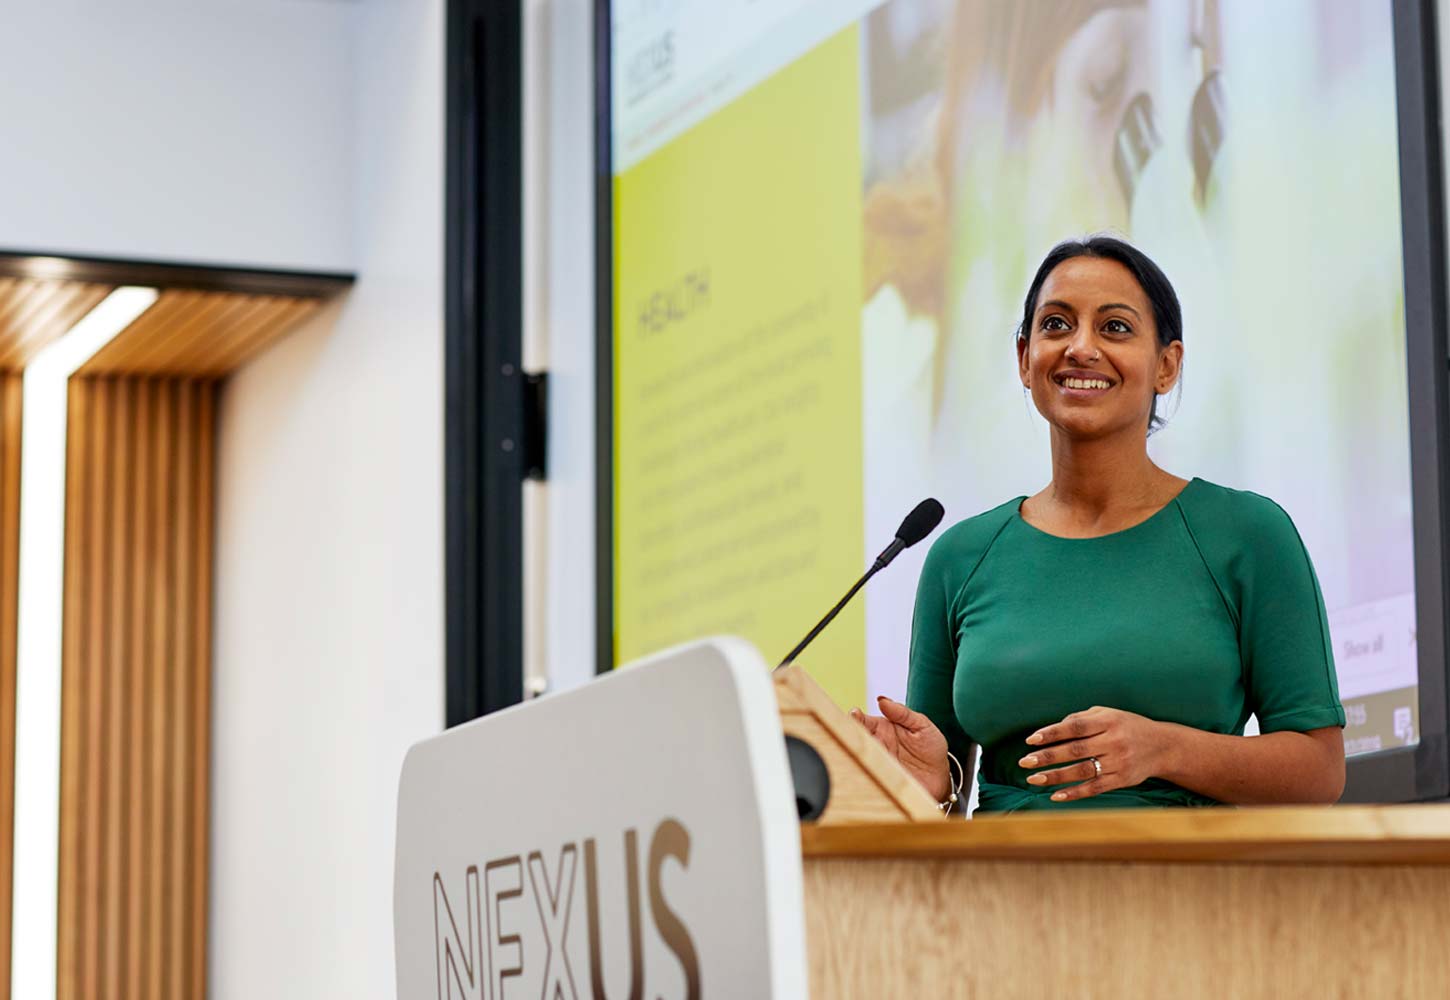 Female standing at lectern and presenting in the Nexus lecture theatre